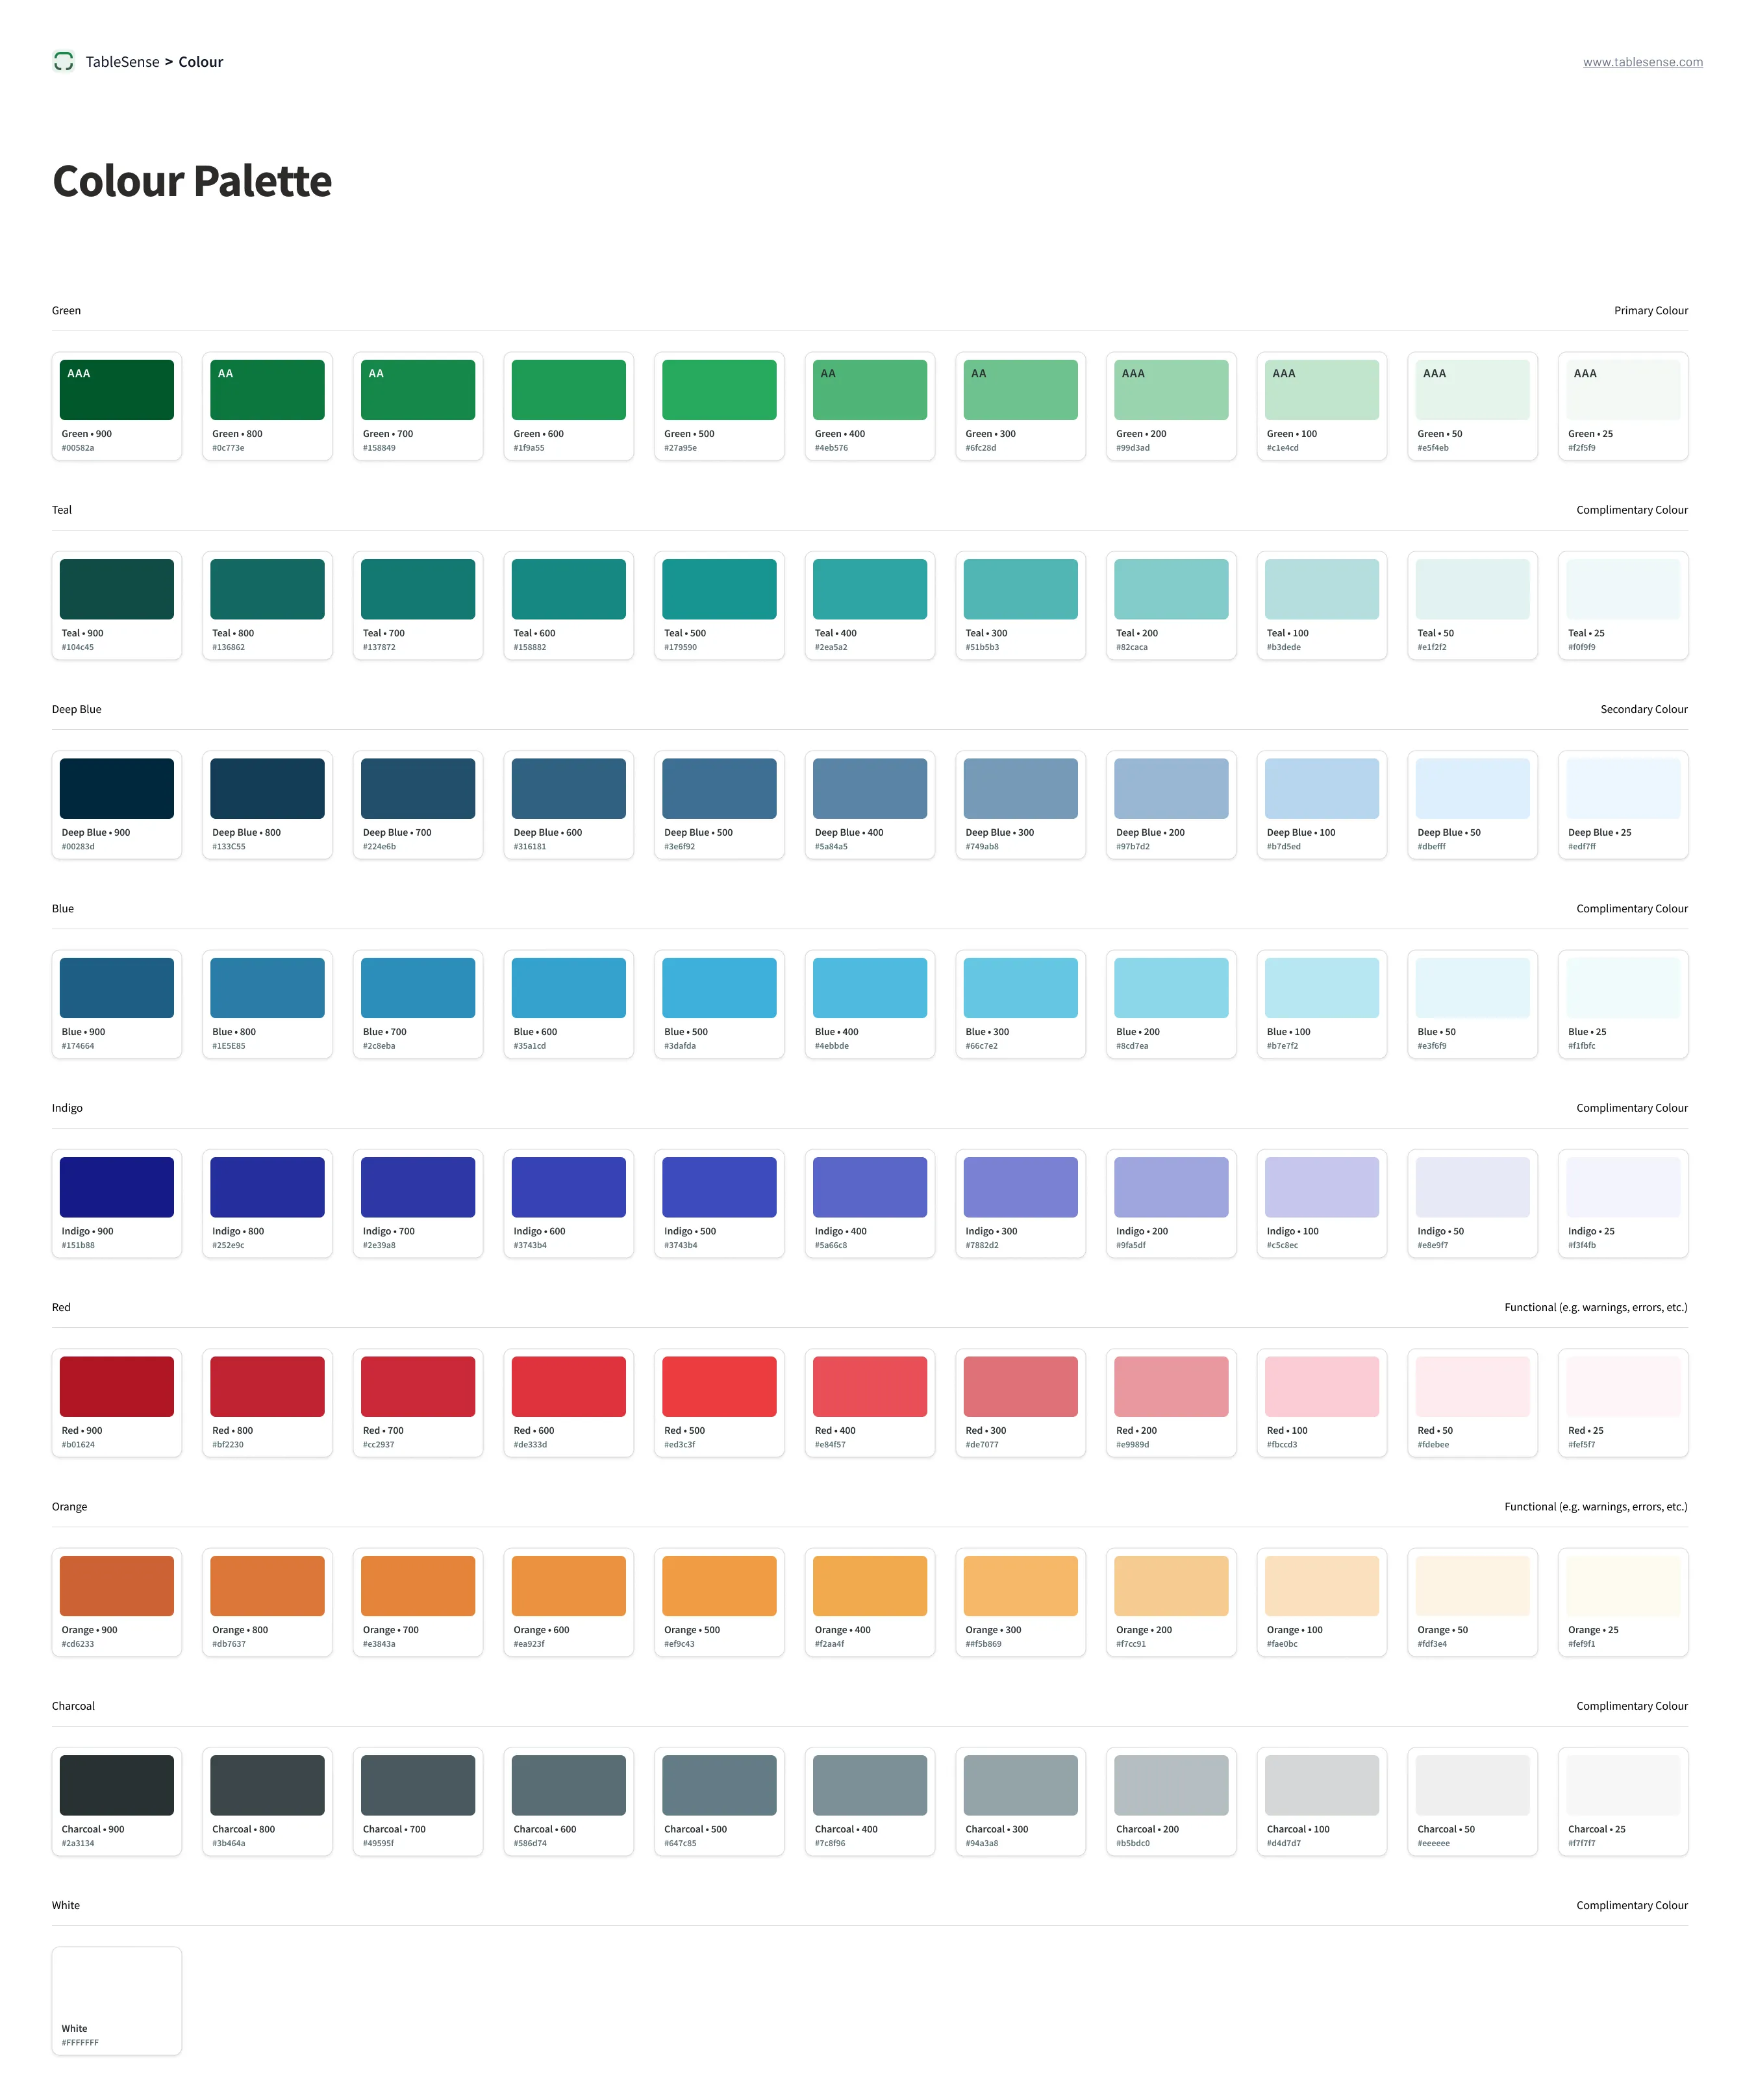 A colour palette for 'TableSense' showcasing a range of shades categorised by colour. The palette includes greens, teals, deep blues, blues, indigos, reds, oranges, charcoals, and a white. Each colour is presented in a gradient of shades, with each individual shade labeled with a name and an accessibility rating such as 'AAA' or 'AA'. For example, the greens range from 'Green-100' to 'Green-900', with varying accessibility ratings next to each. The colours are organised in rows by their hue, with annotations for primary, secondary, and complementary colours, as well as functional colours for warnings, errors, etc.